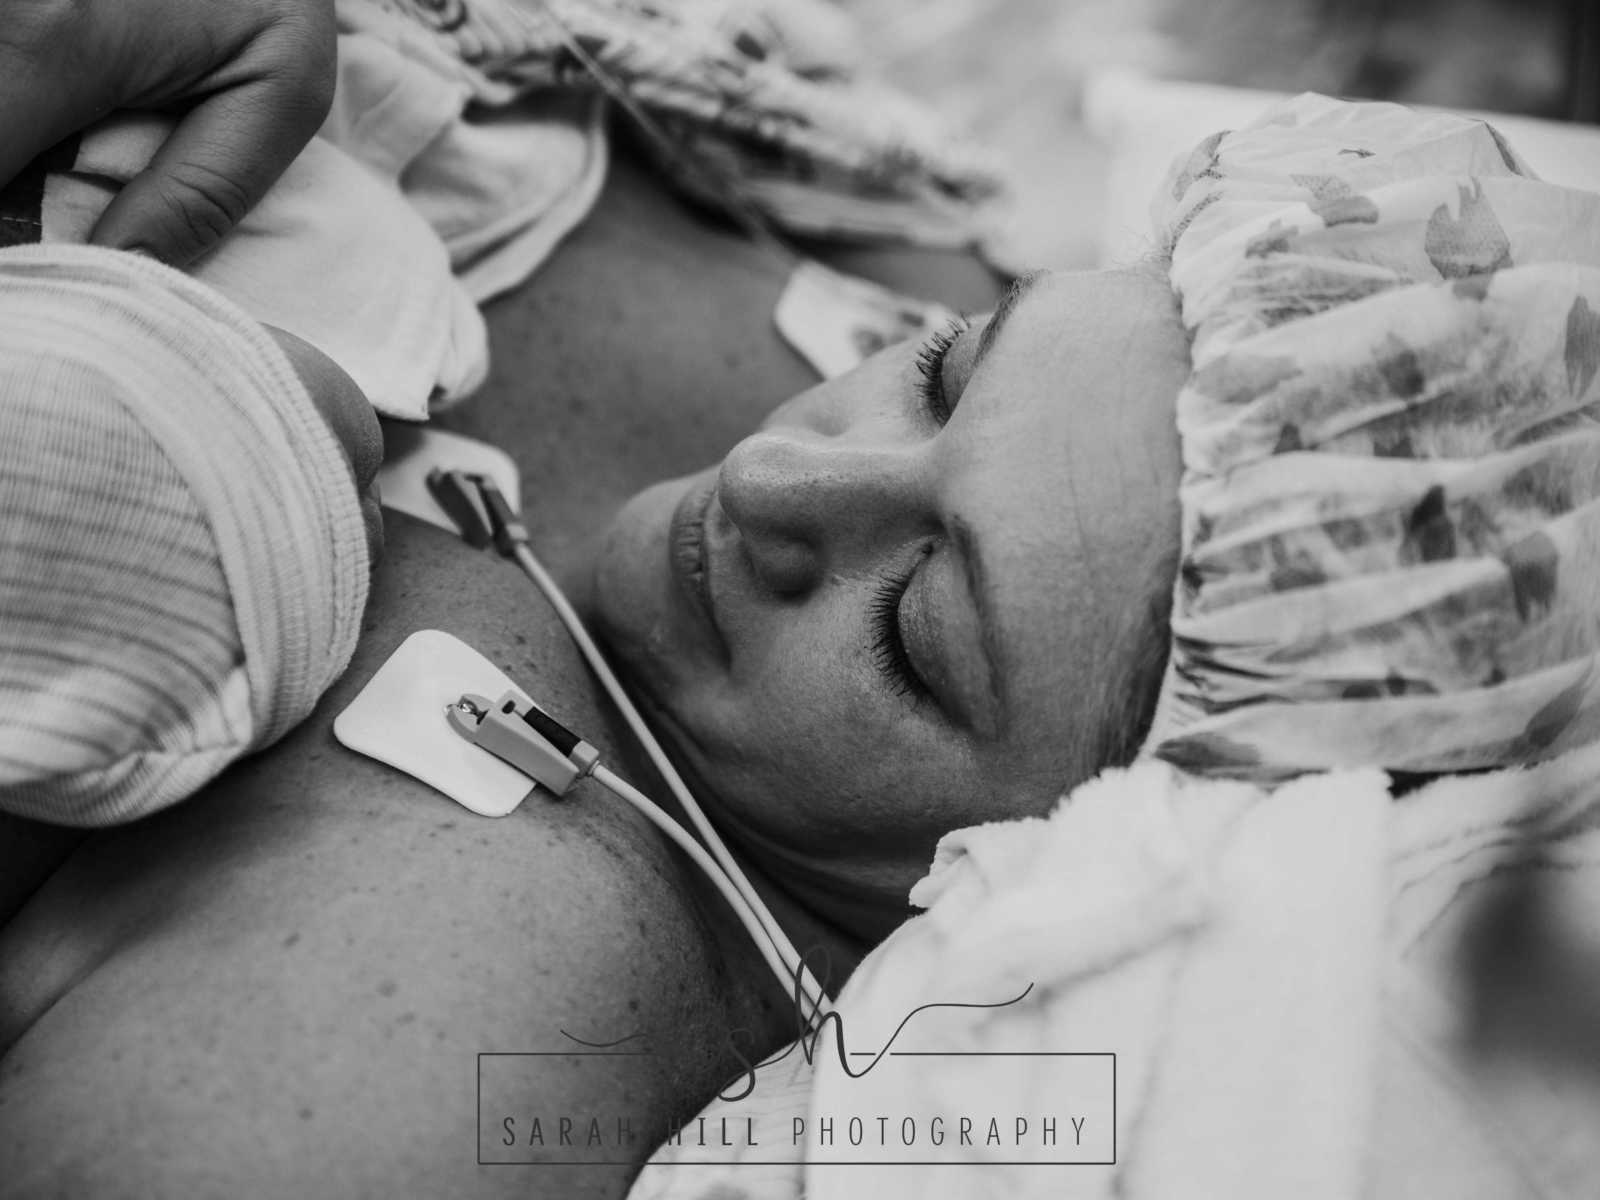 Woman who is also a midwife helped pull her c-section baby out lays with newborn on her bare chest